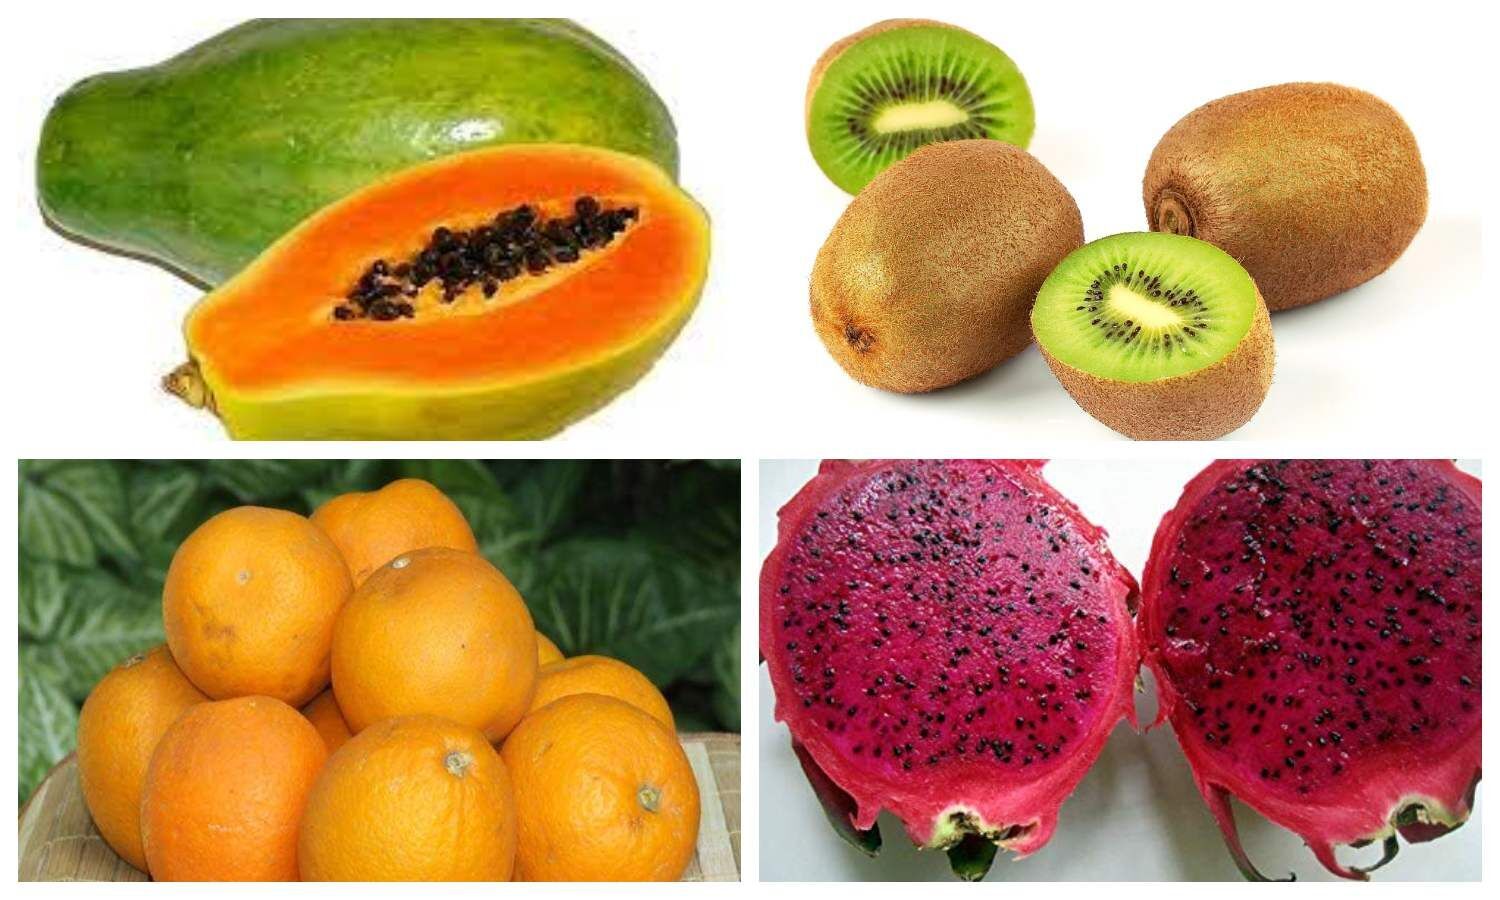 Fruits Health Benefits: Such super fruits that make you strong, let’s know why their consumption is important